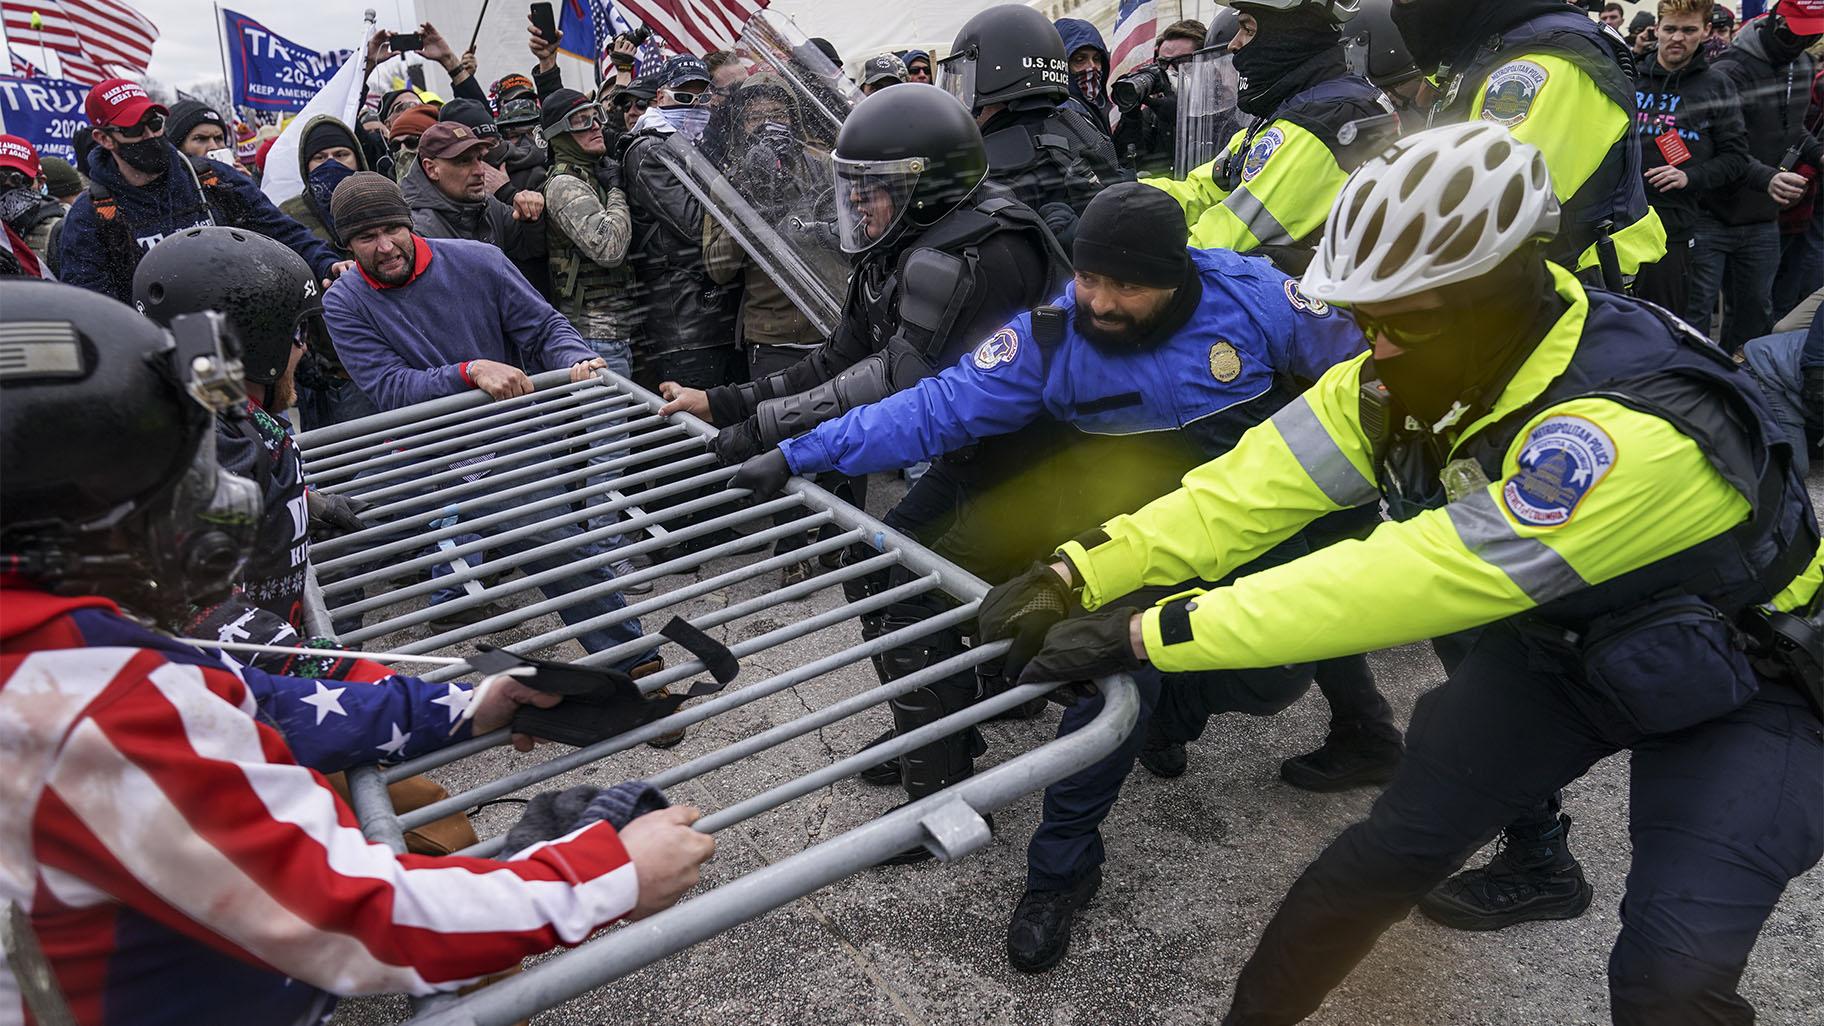 FILE - In this file photo from Wednesday Jan. 6, 2021, Trump supporters beset a police barrier at the Capitol in Washington. (AP Photo / John Minchillo, File)